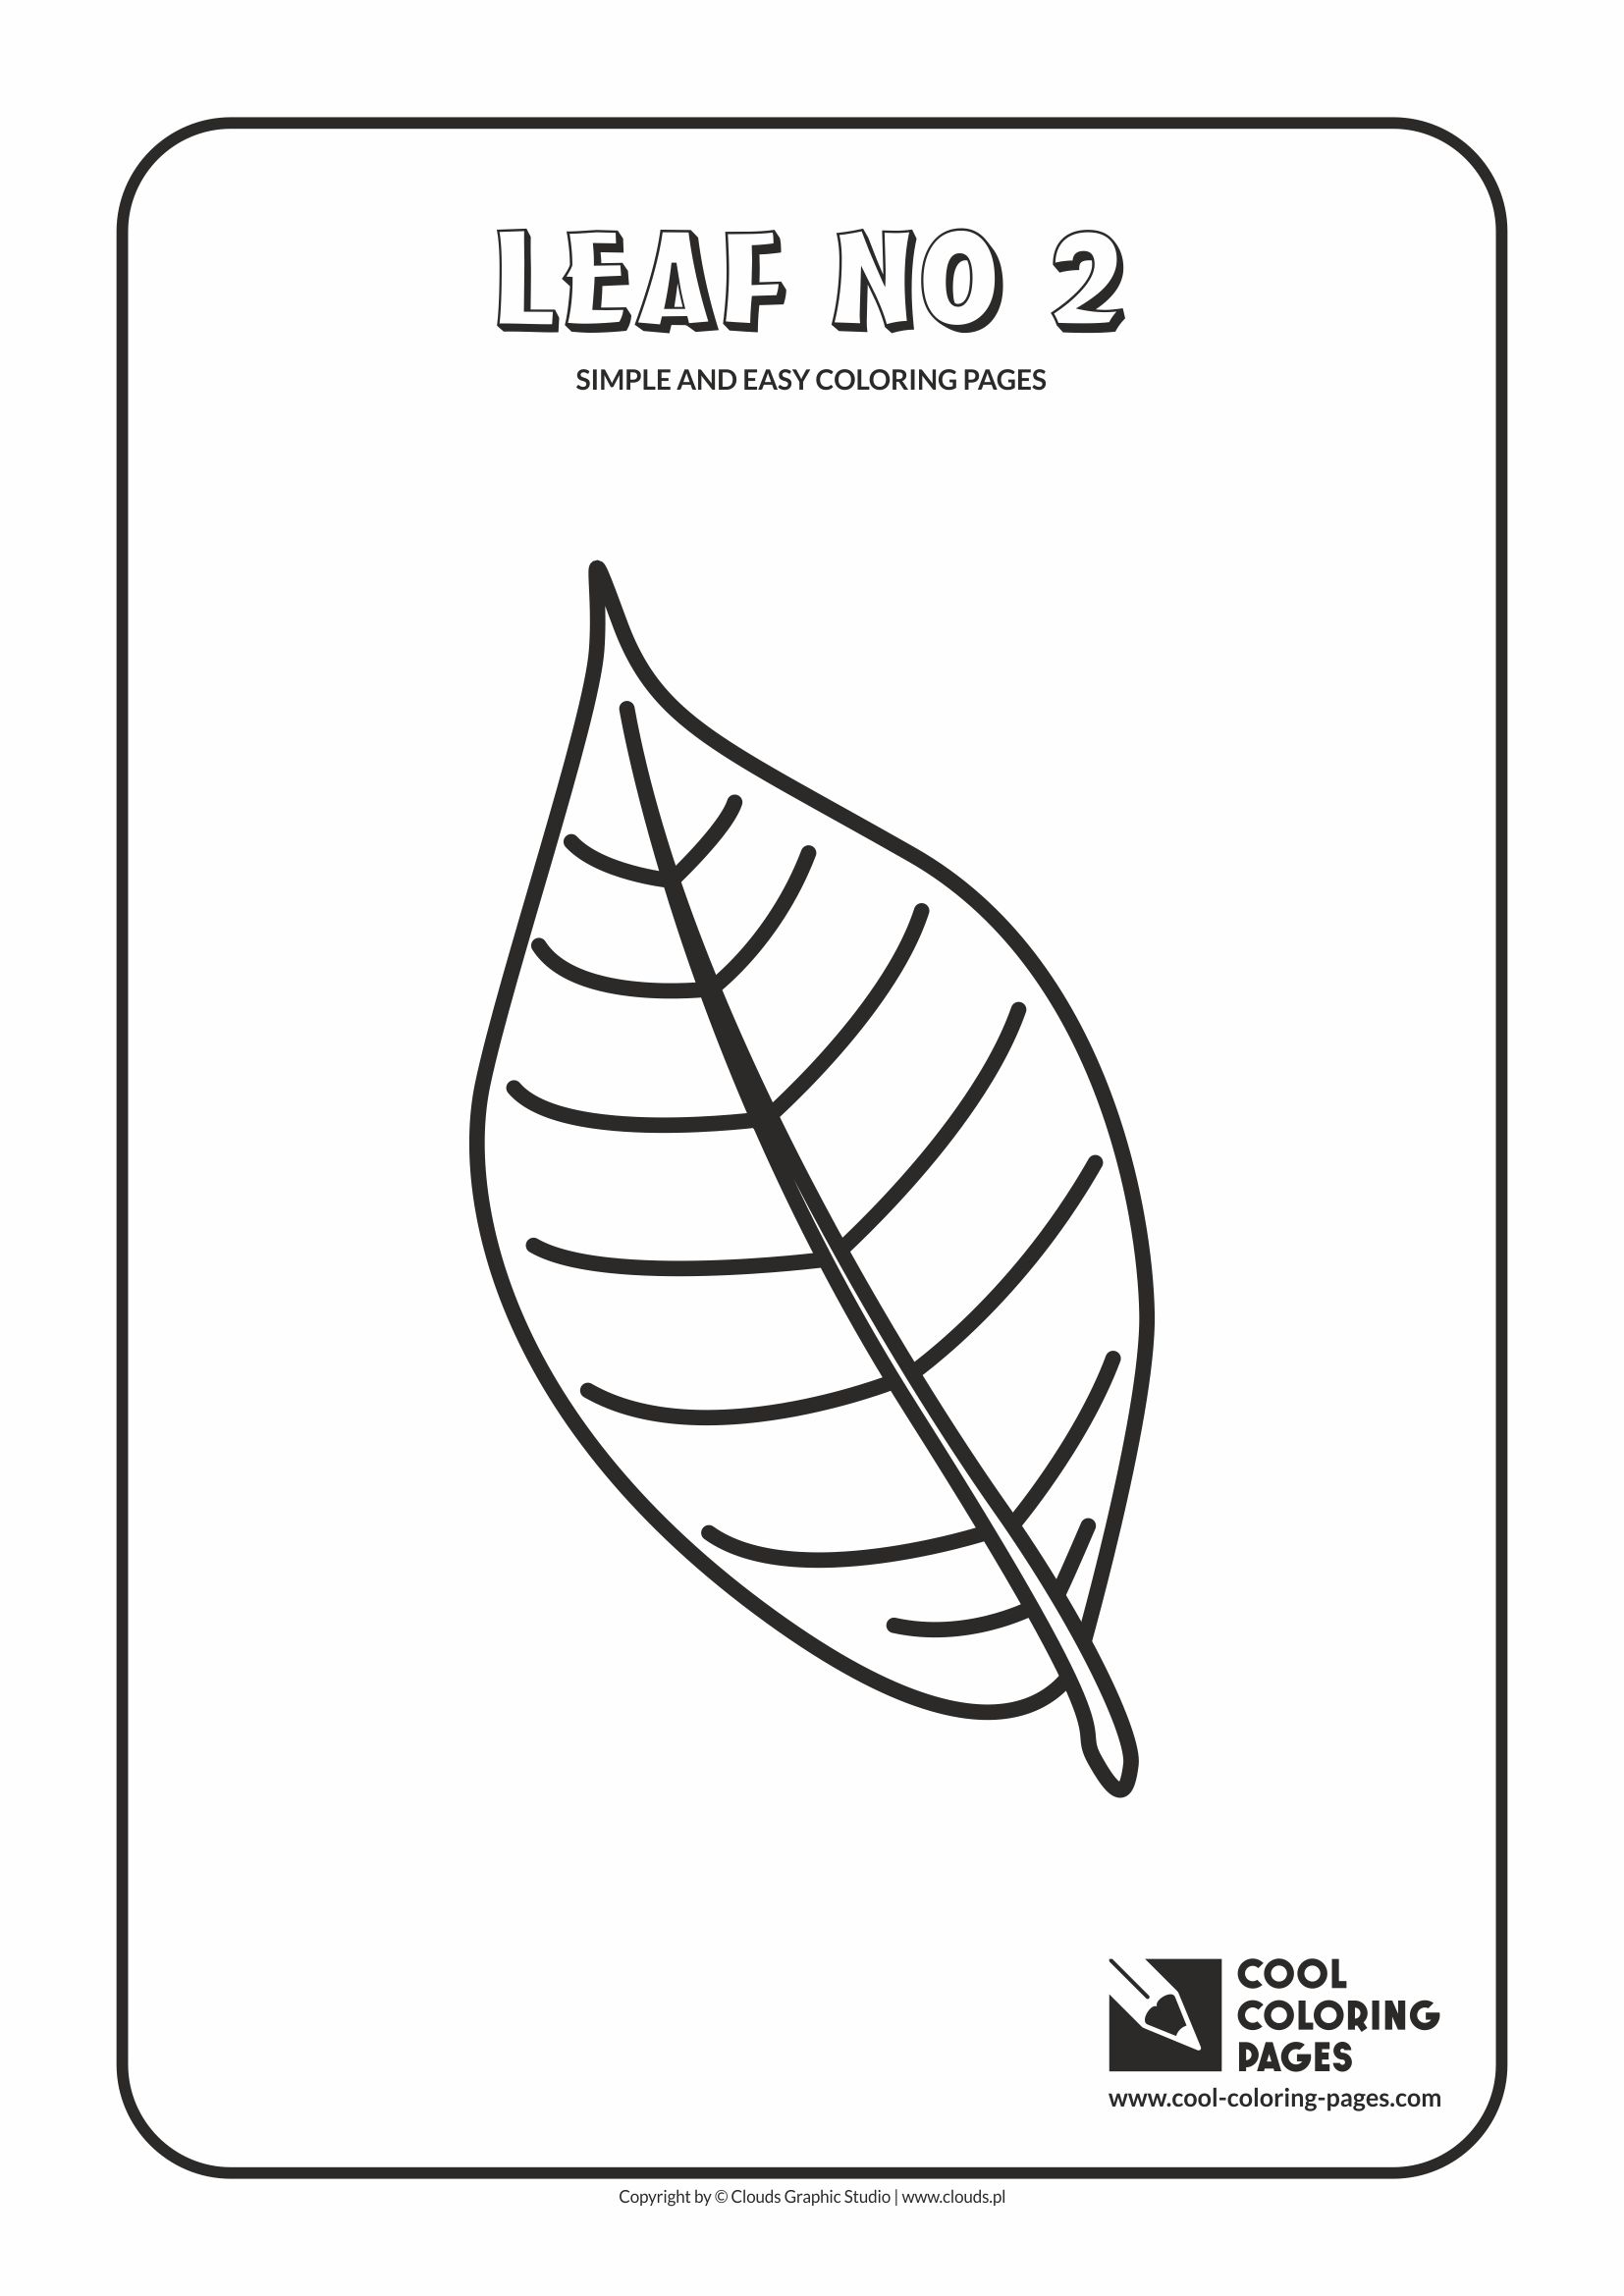 Simple and easy coloring pages for toddlers - Leaf no 2